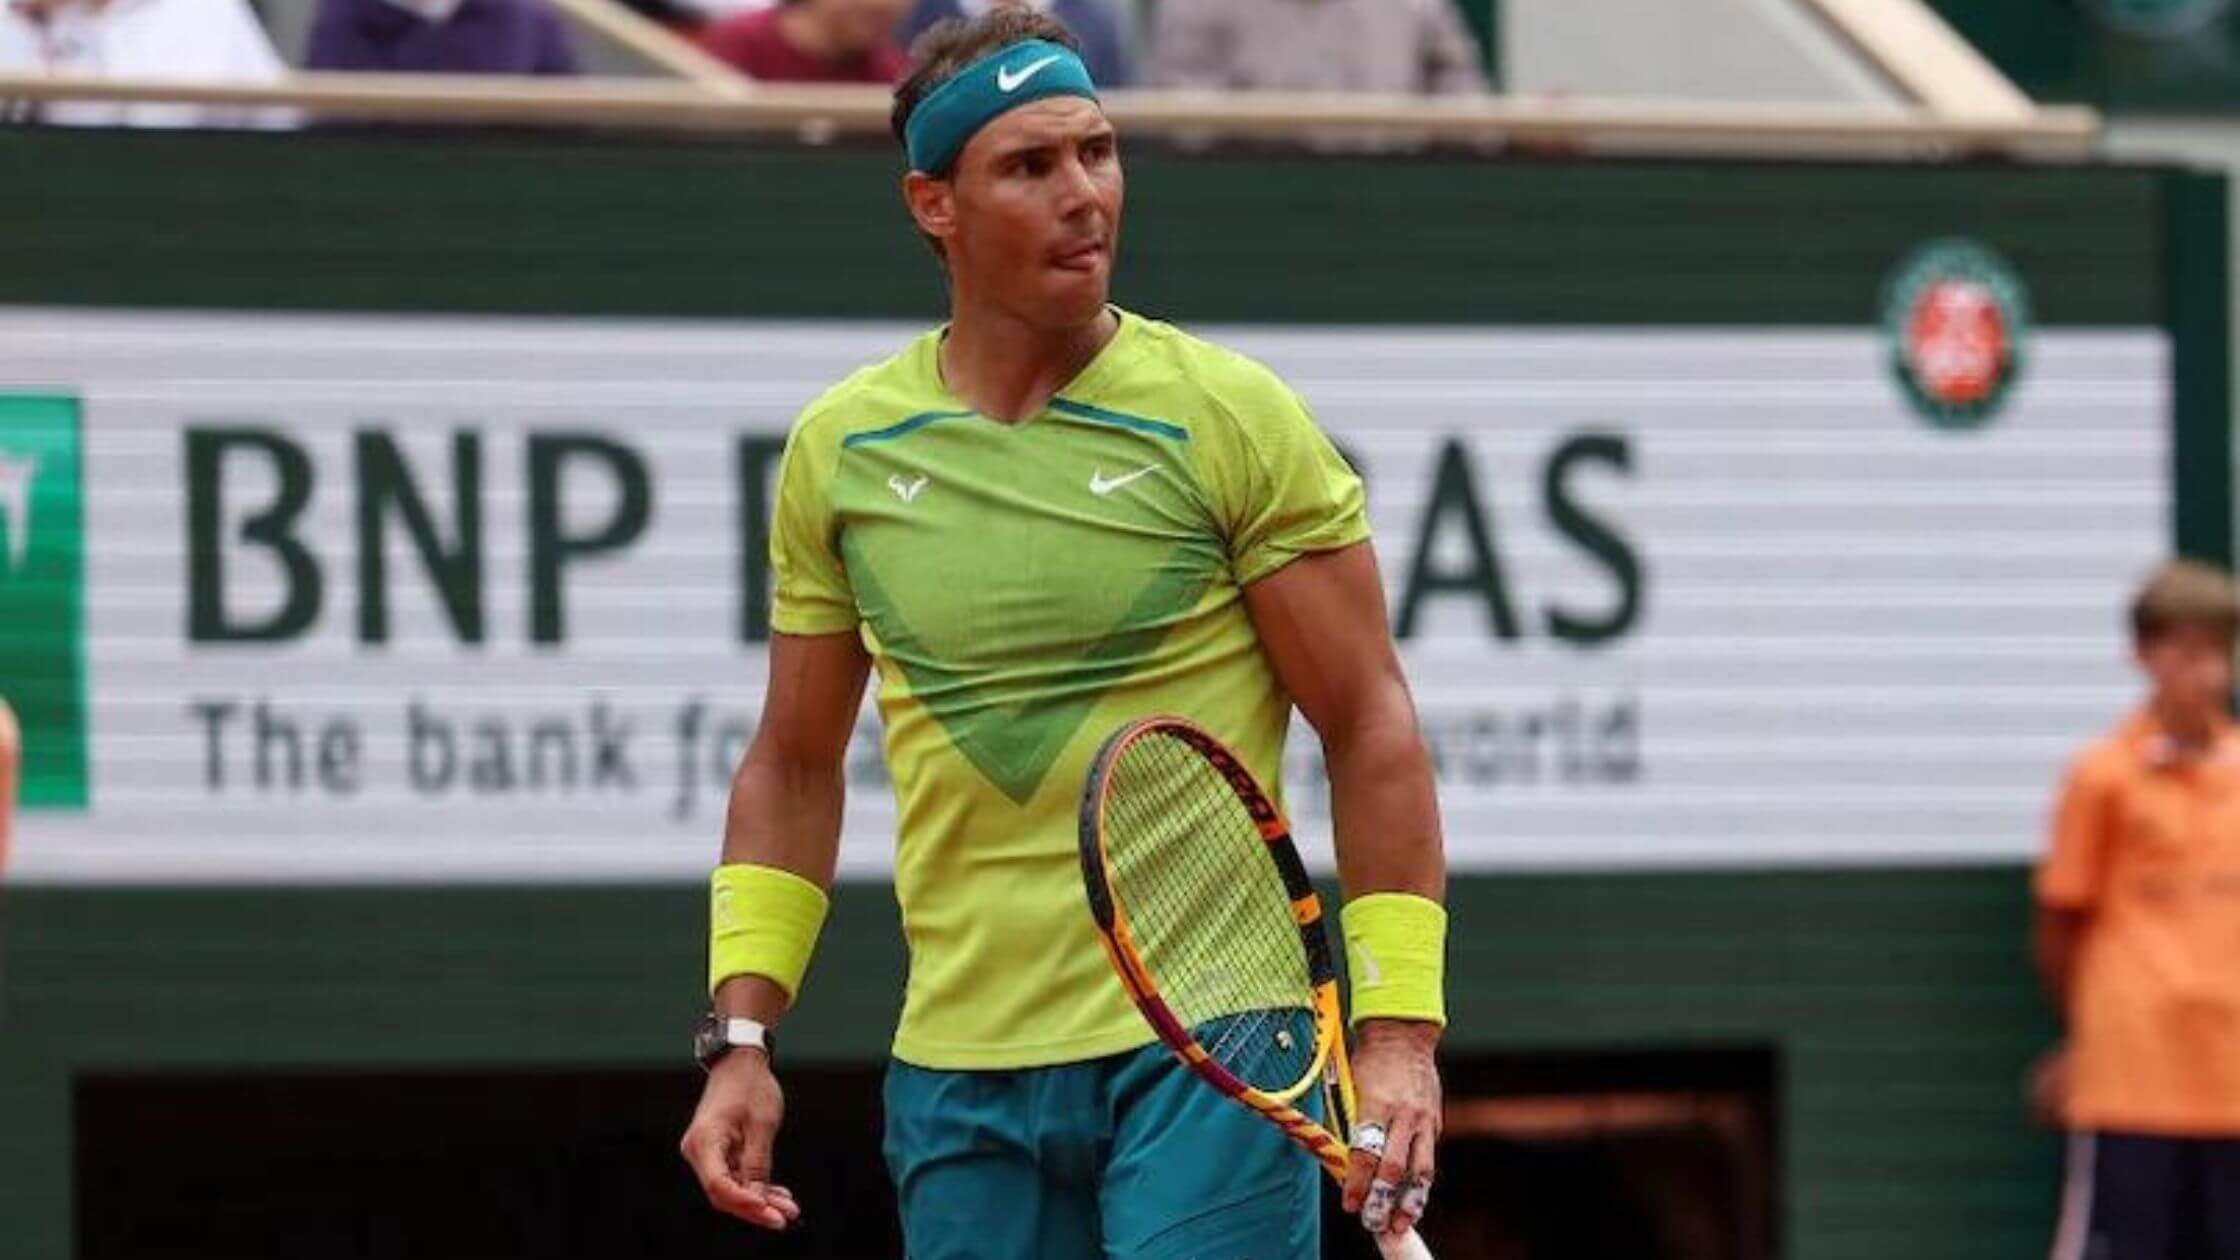 Rafael Nadal Wins His 14th French Open Championship And A Record-Breaking 22nd Grand Slam Title